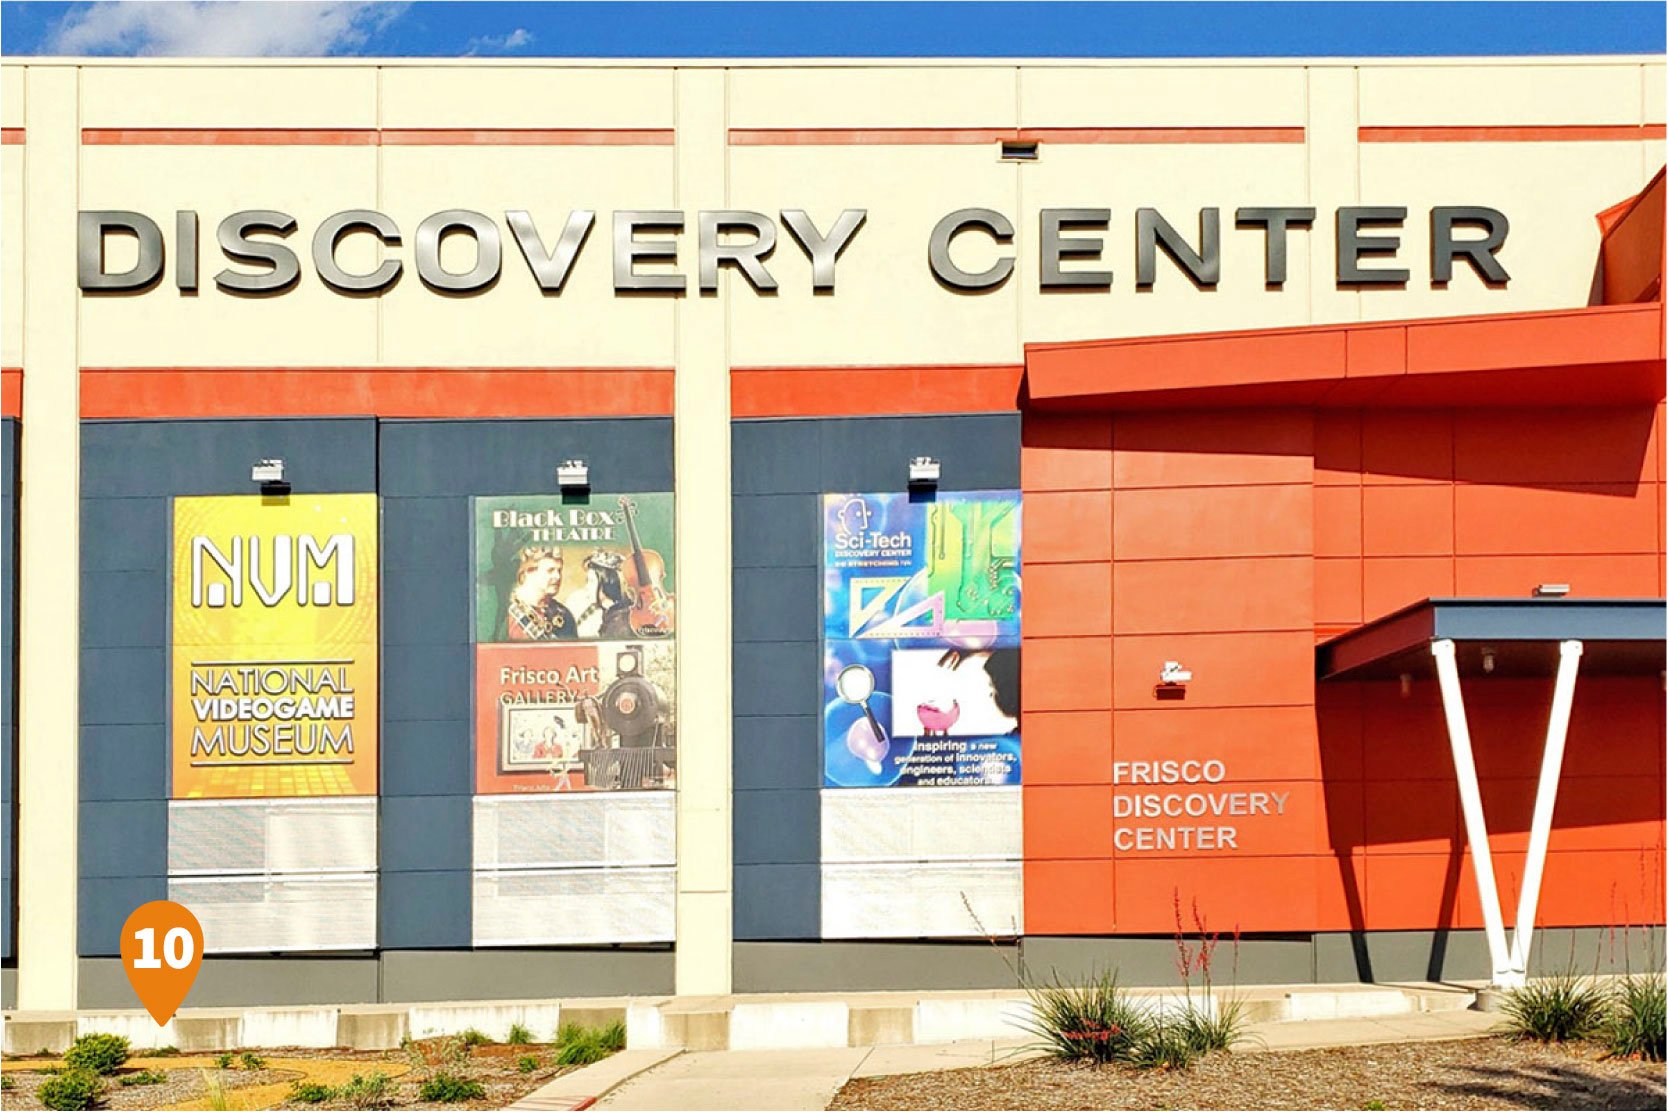 Sci-Tech Discovery Center